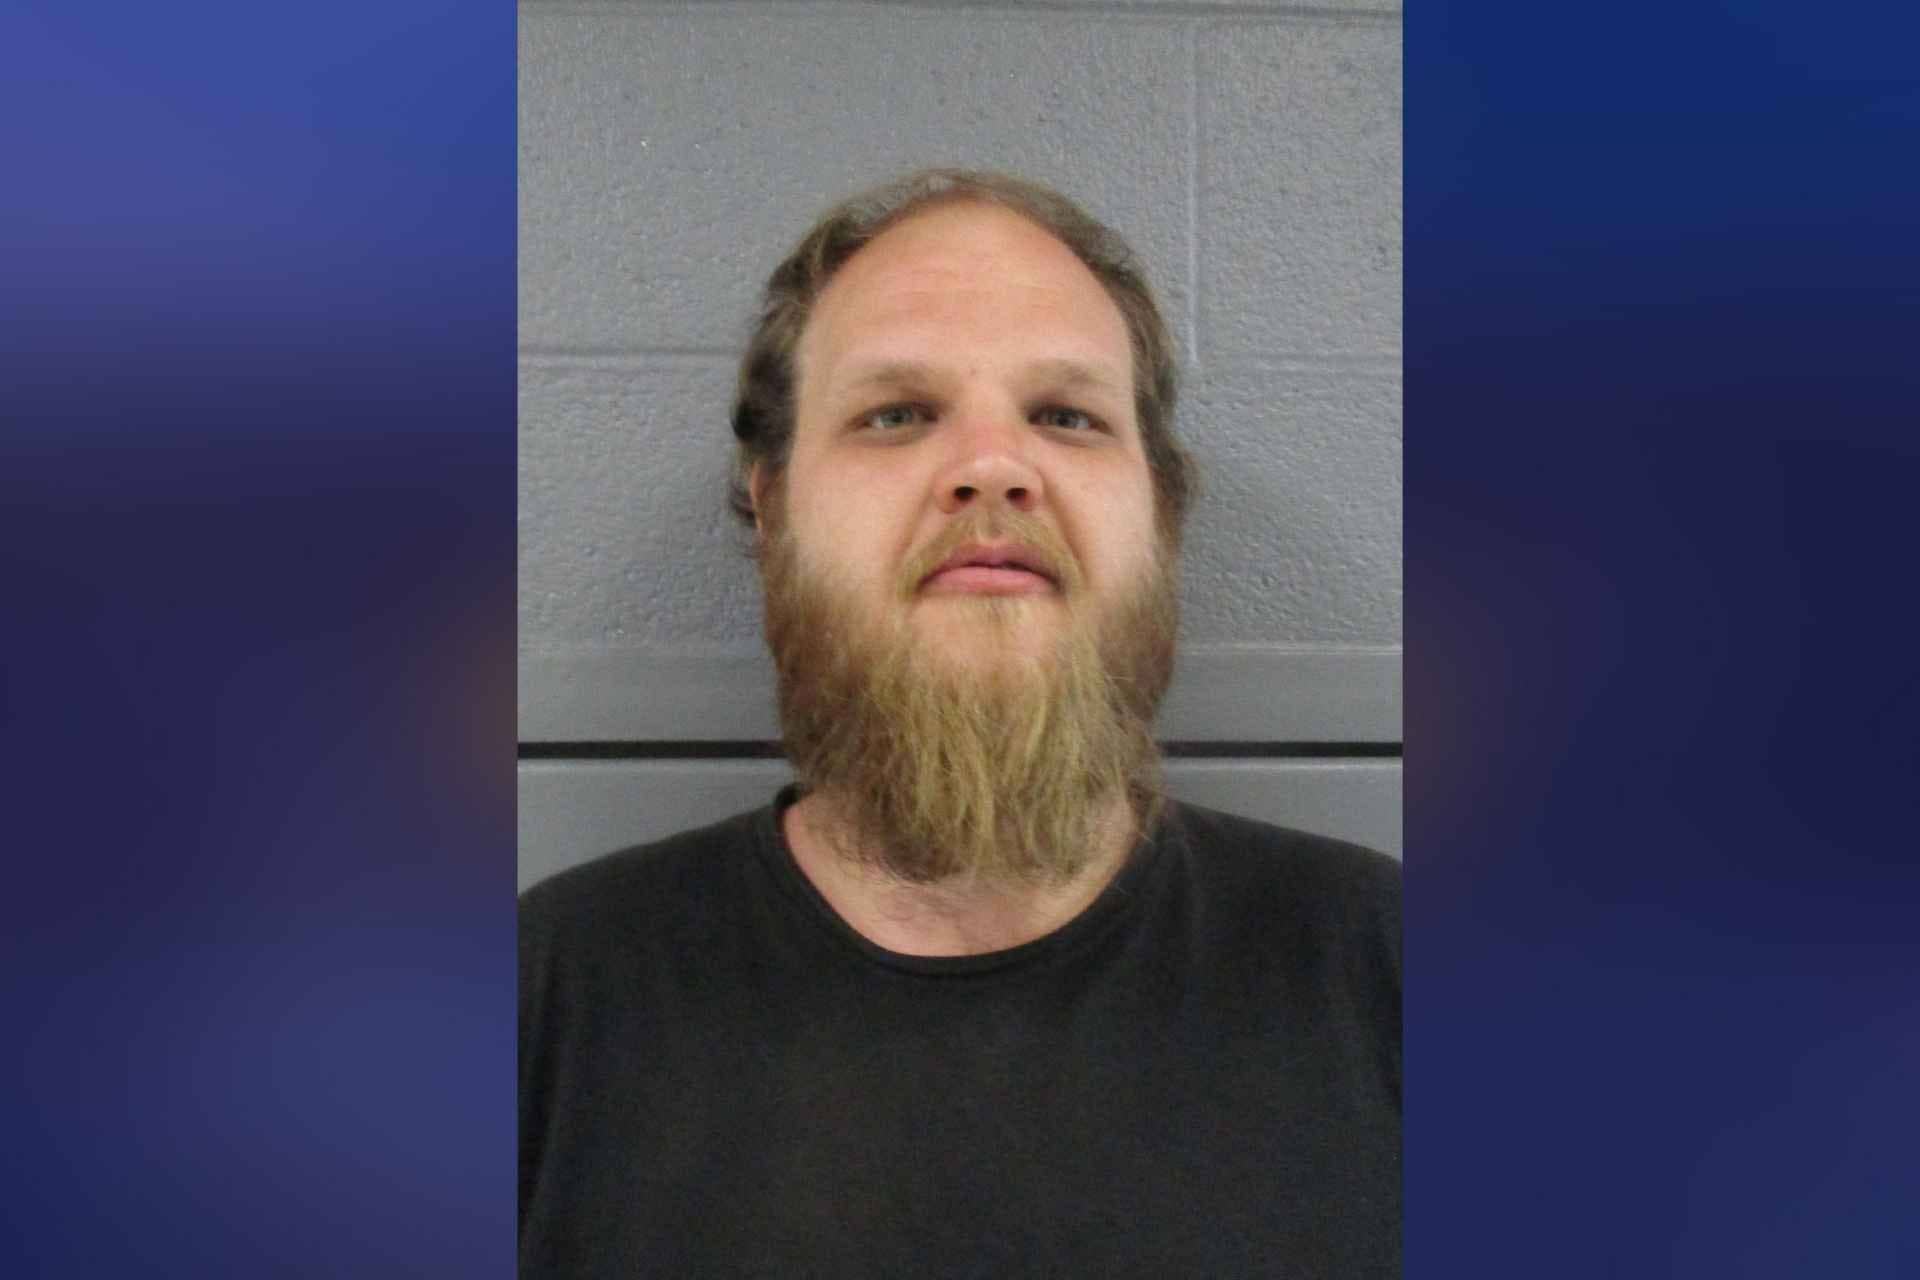 Rock Cave man arrested after allegedly hitting another man on the head with a picture